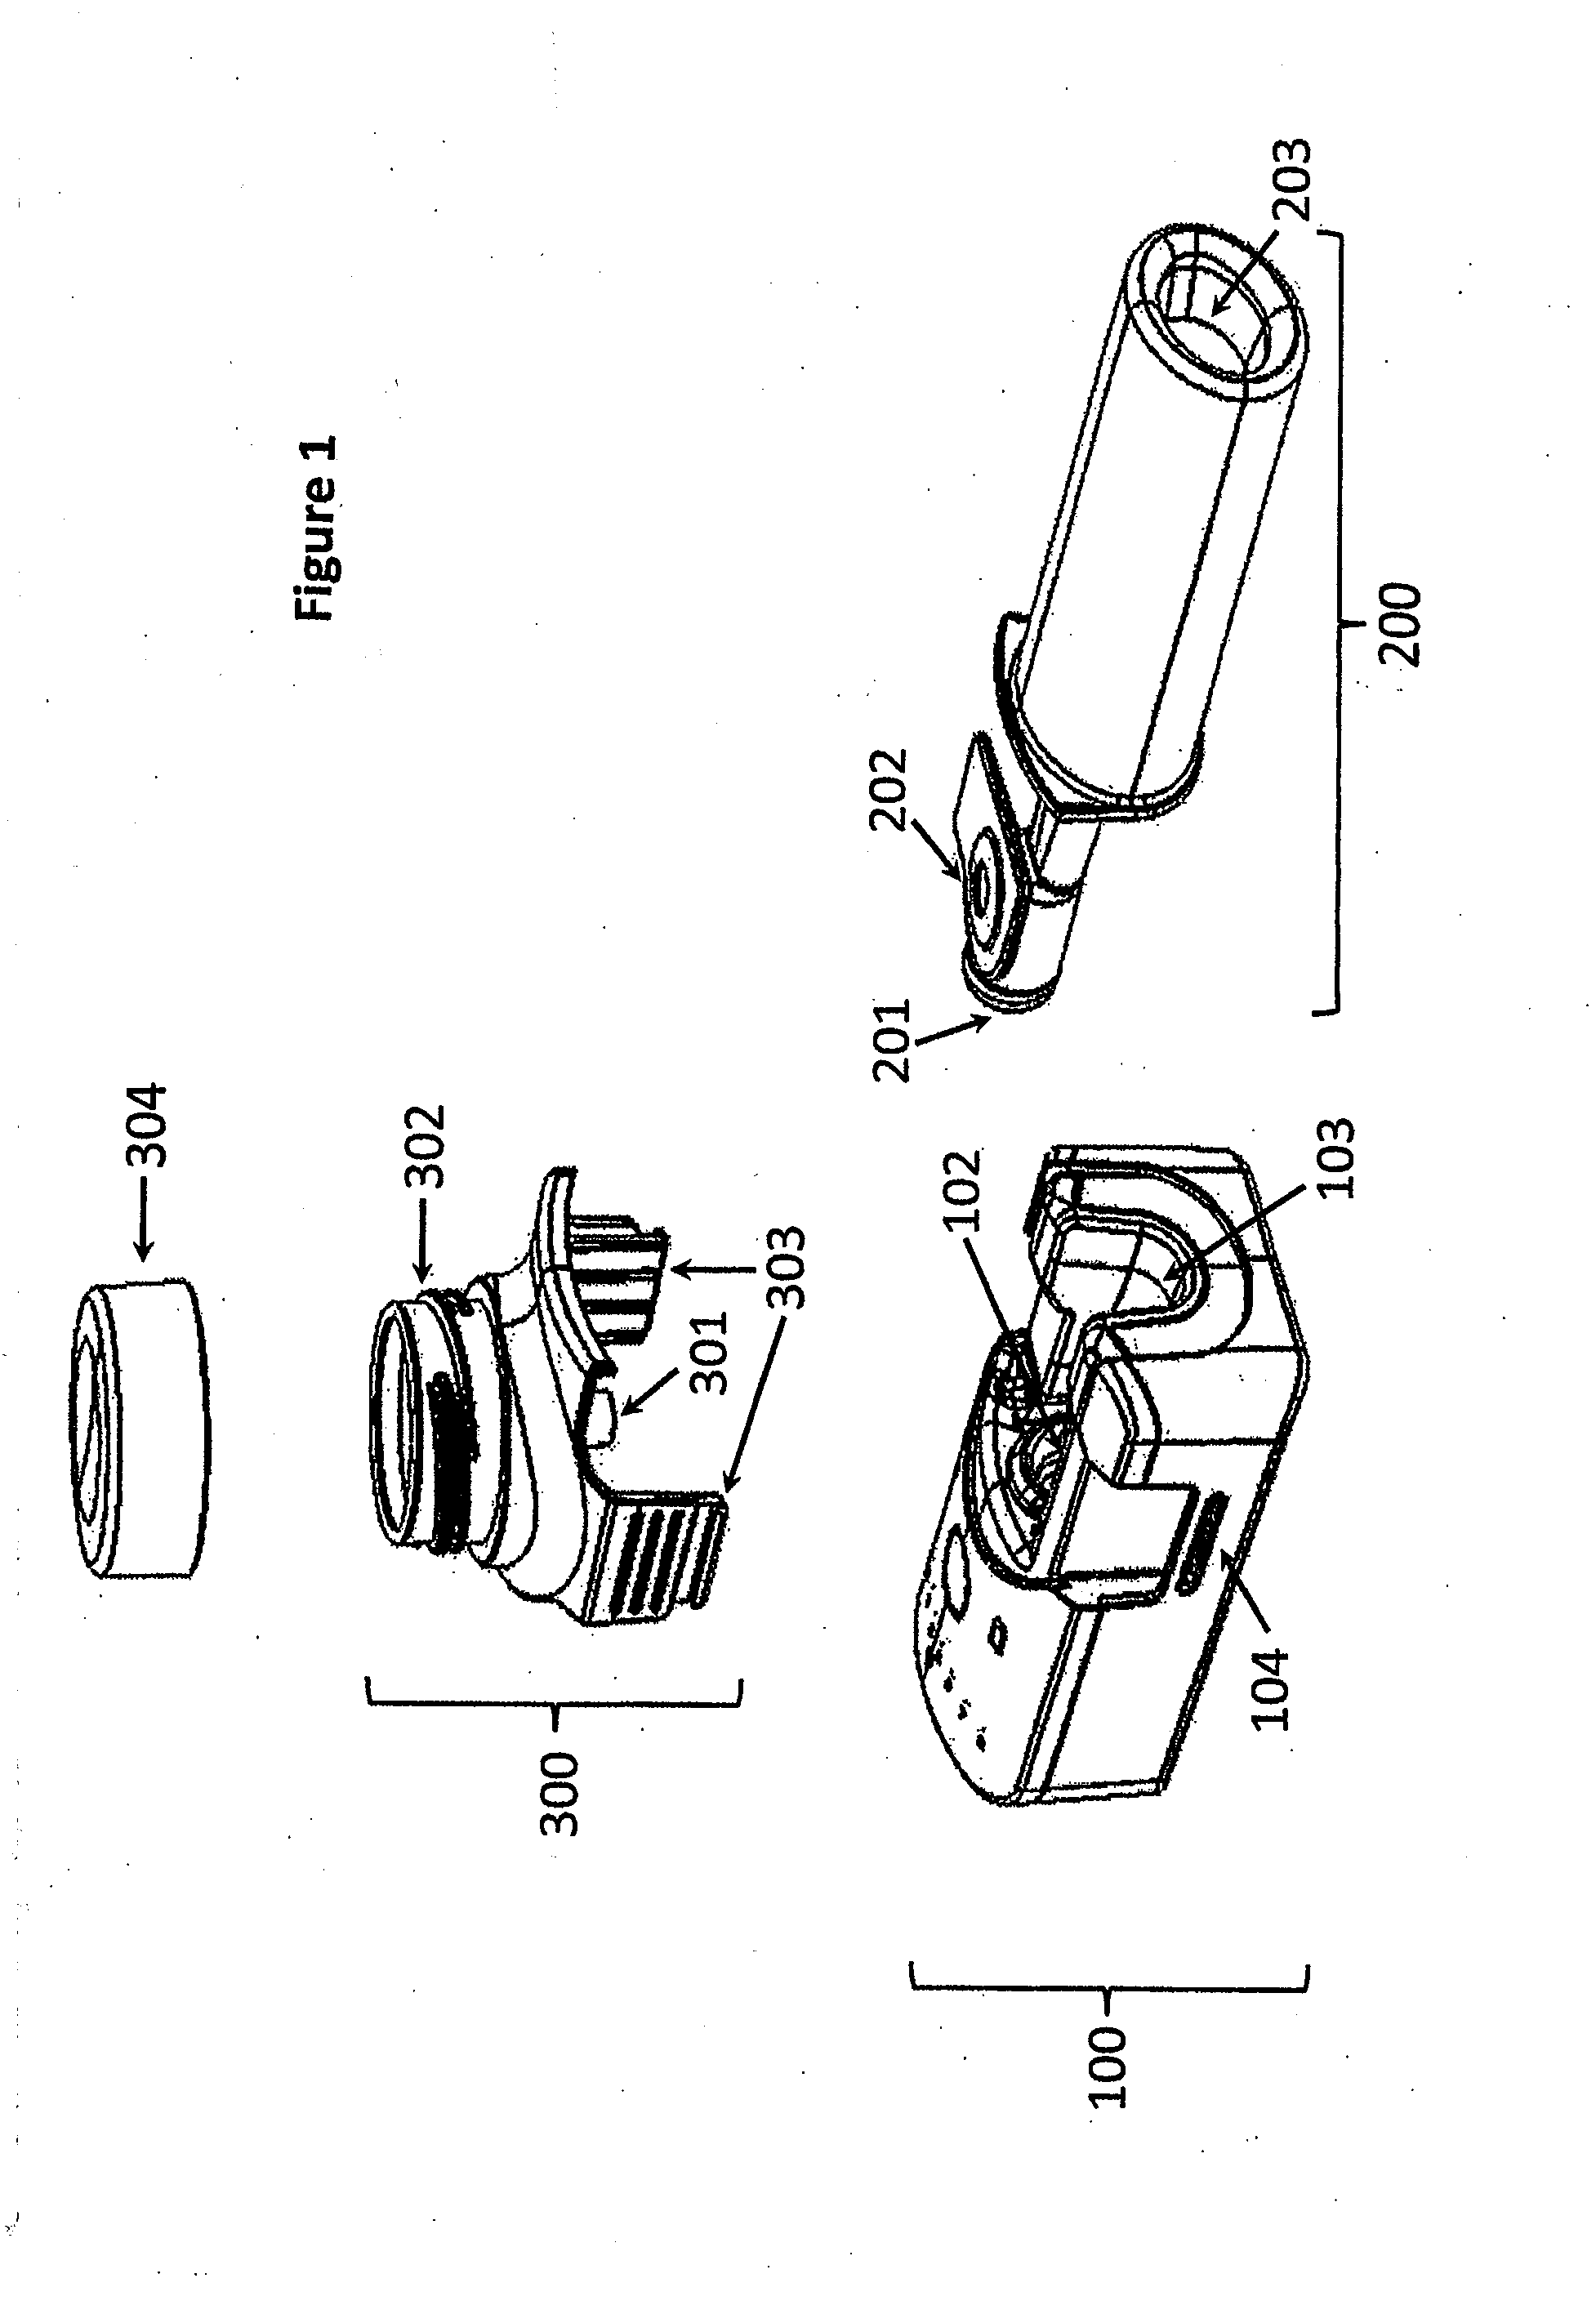 Inhalation device for use in aerosol therapy